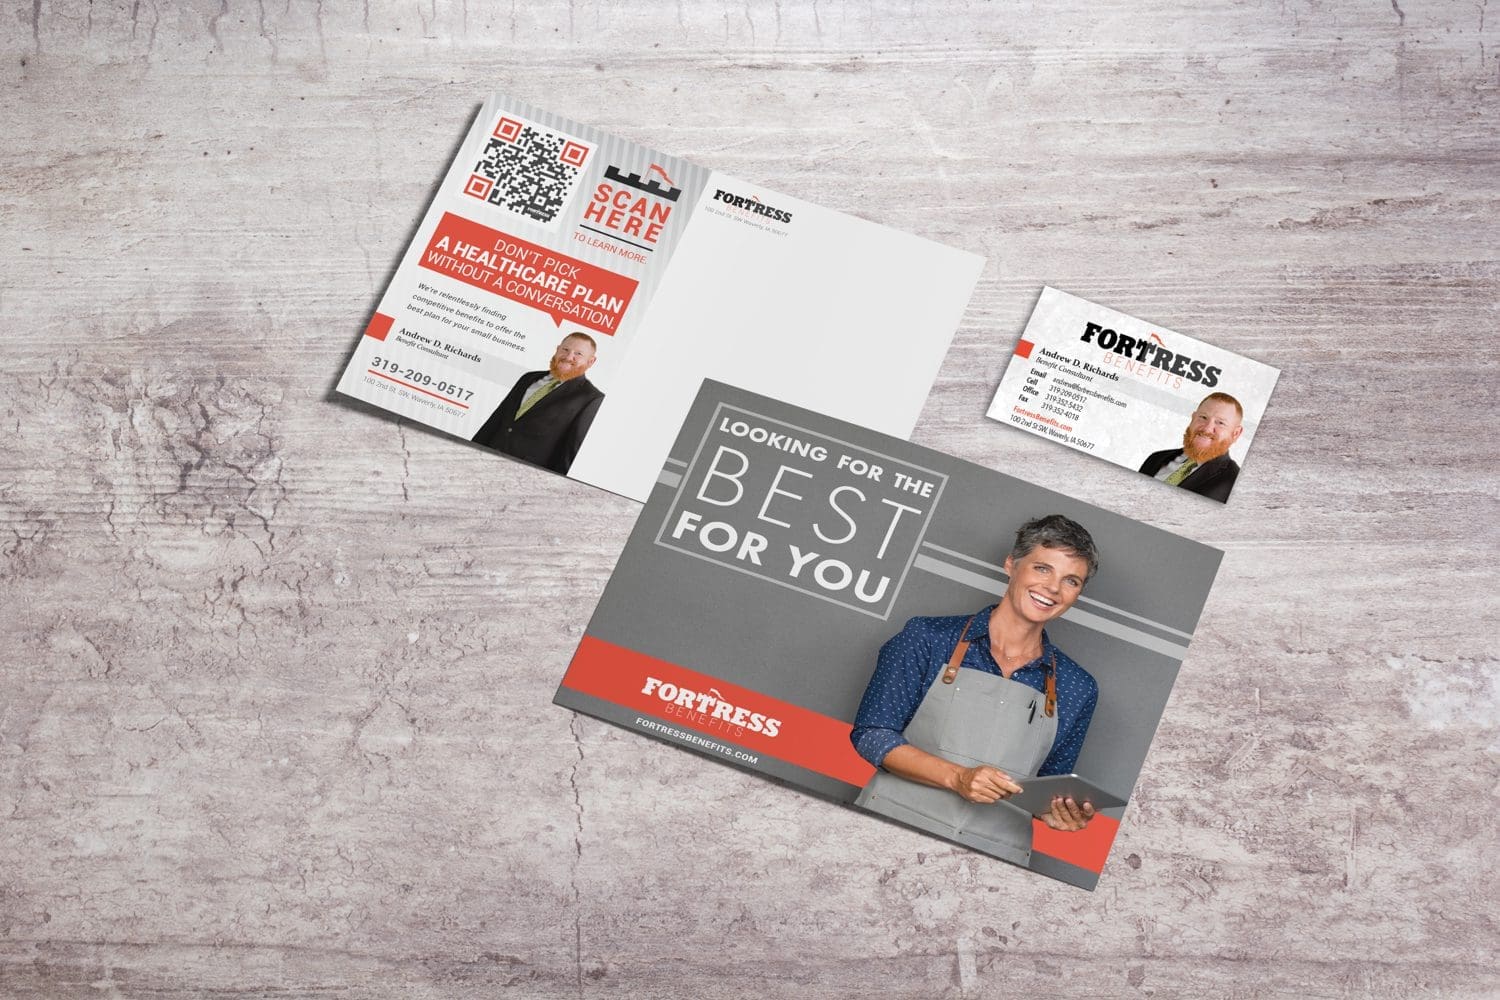 Fortress Benefits business cards mailer and handout